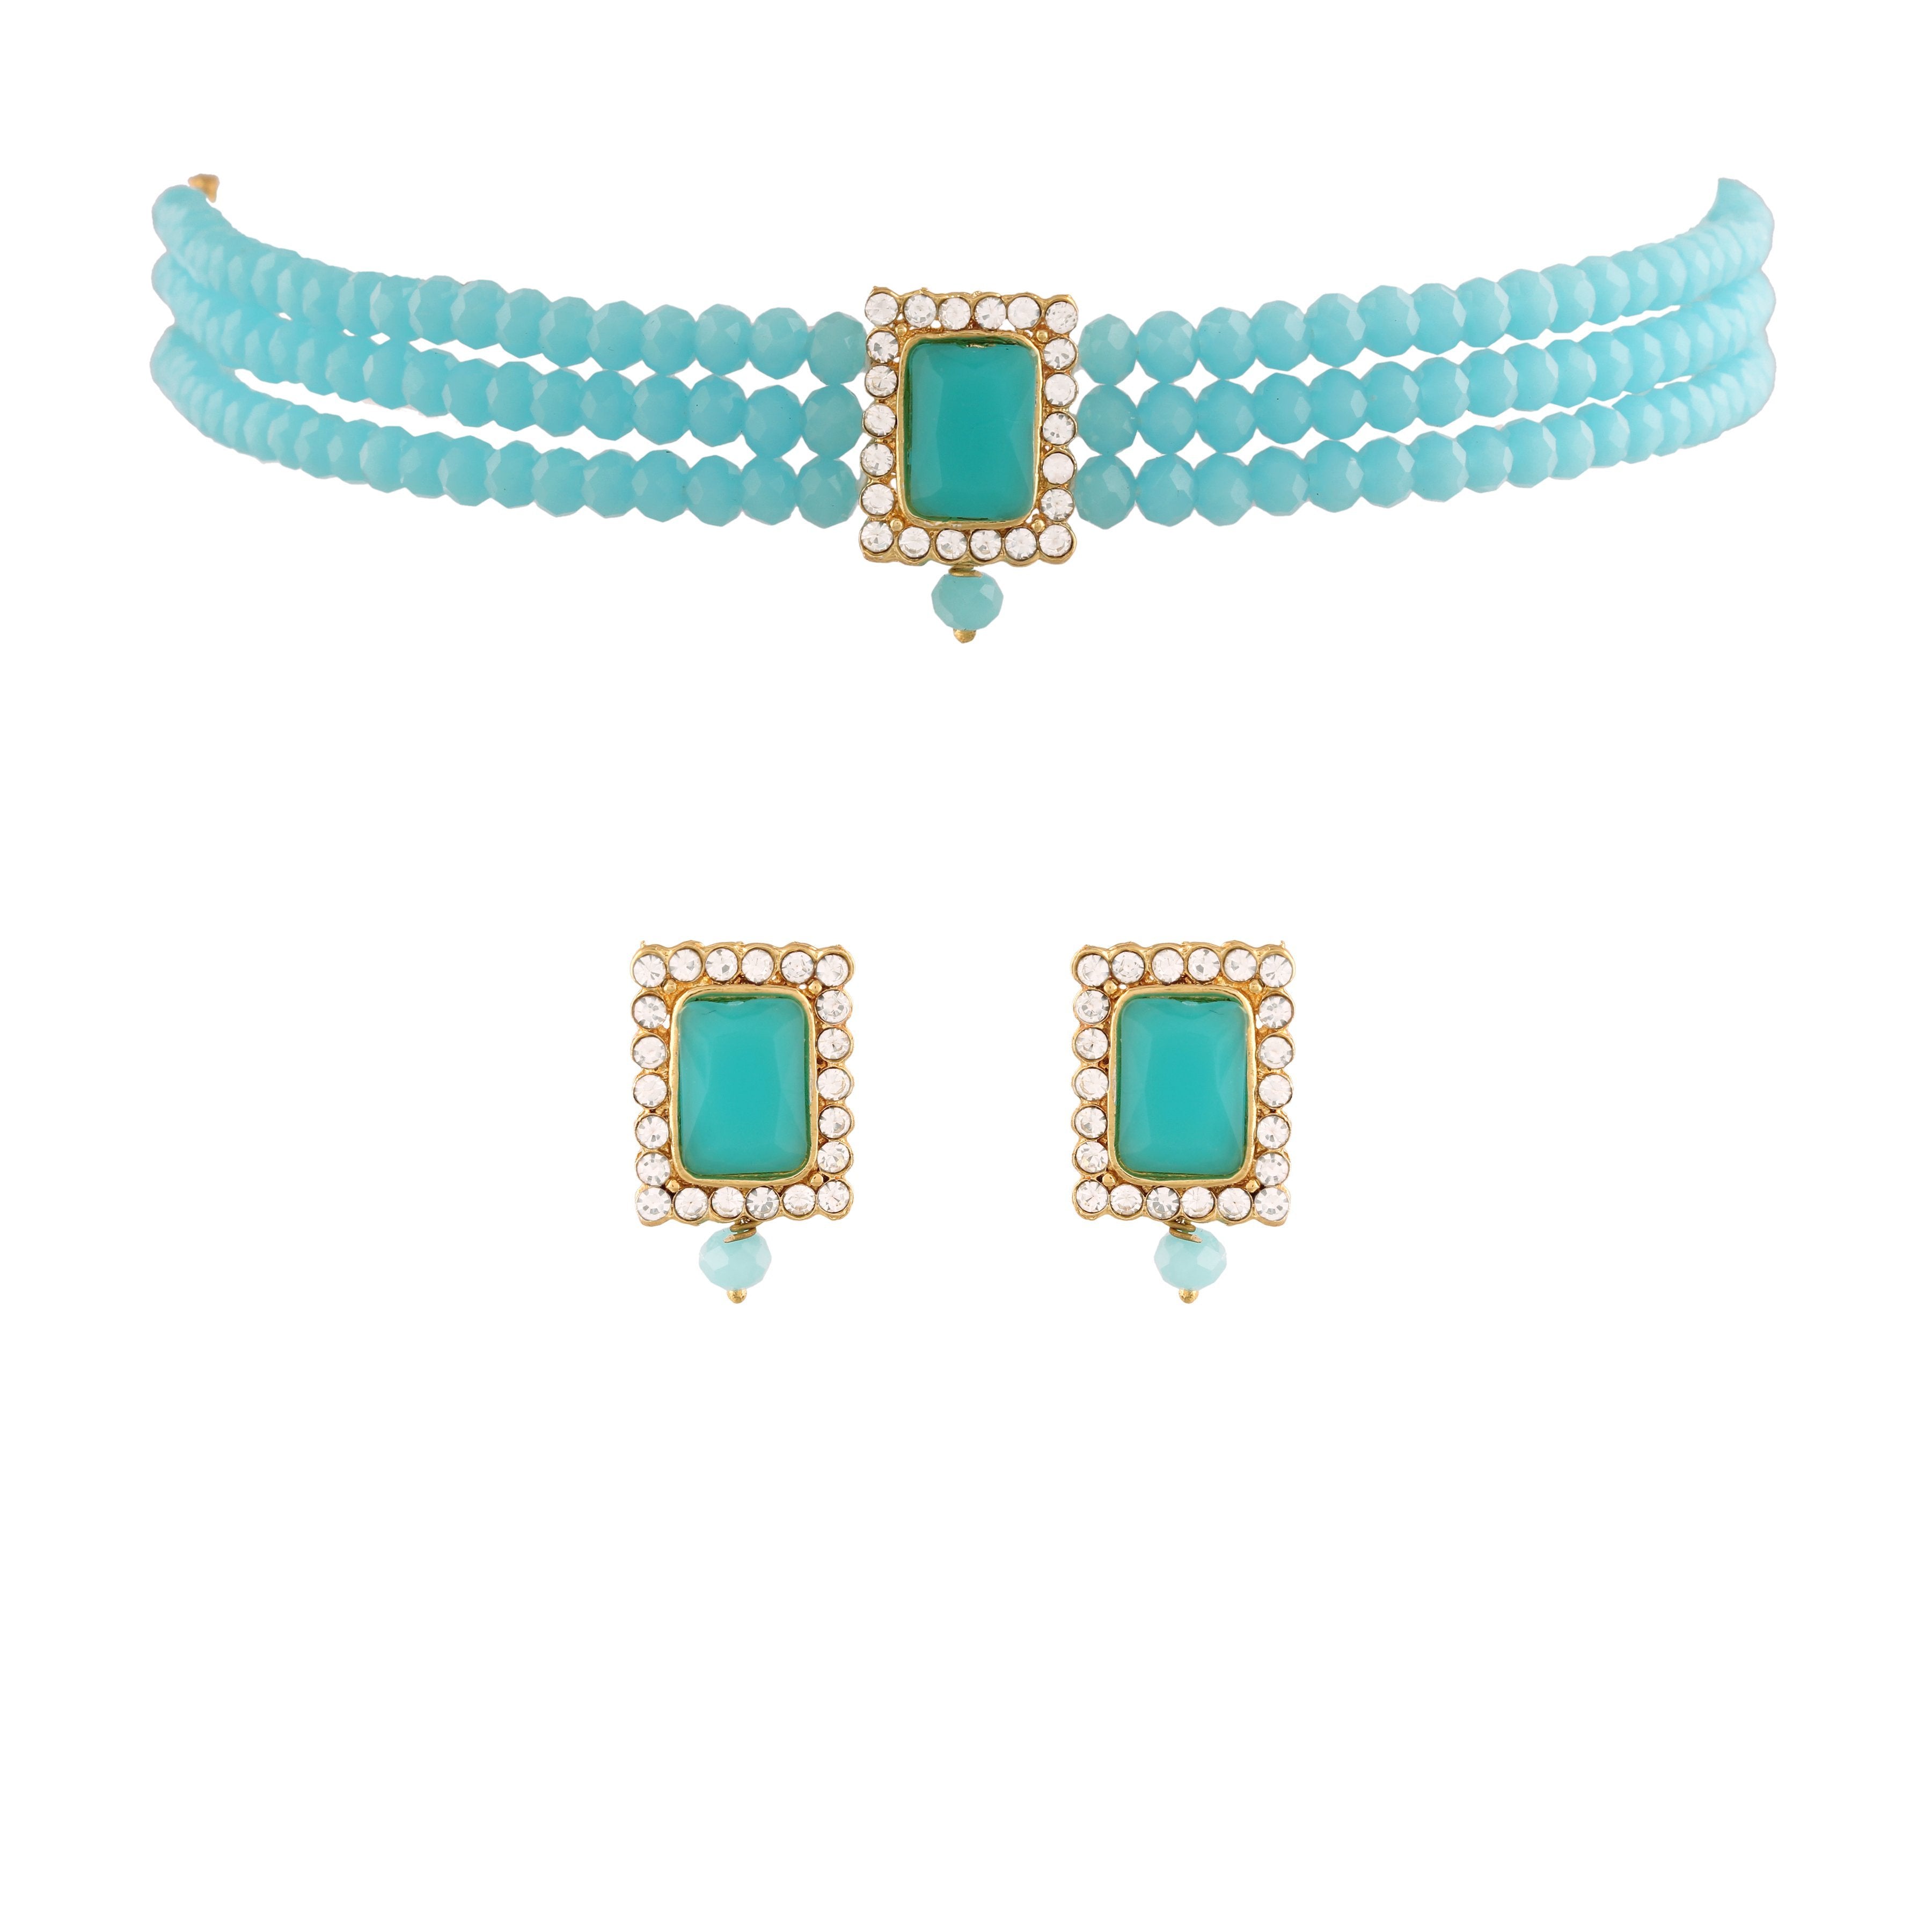 Women's  Gold Plated Traditional Handcrafted Turquoise Crystal Stone Beaded Choker Necklace Jewellery Set With Earrings - i jewels